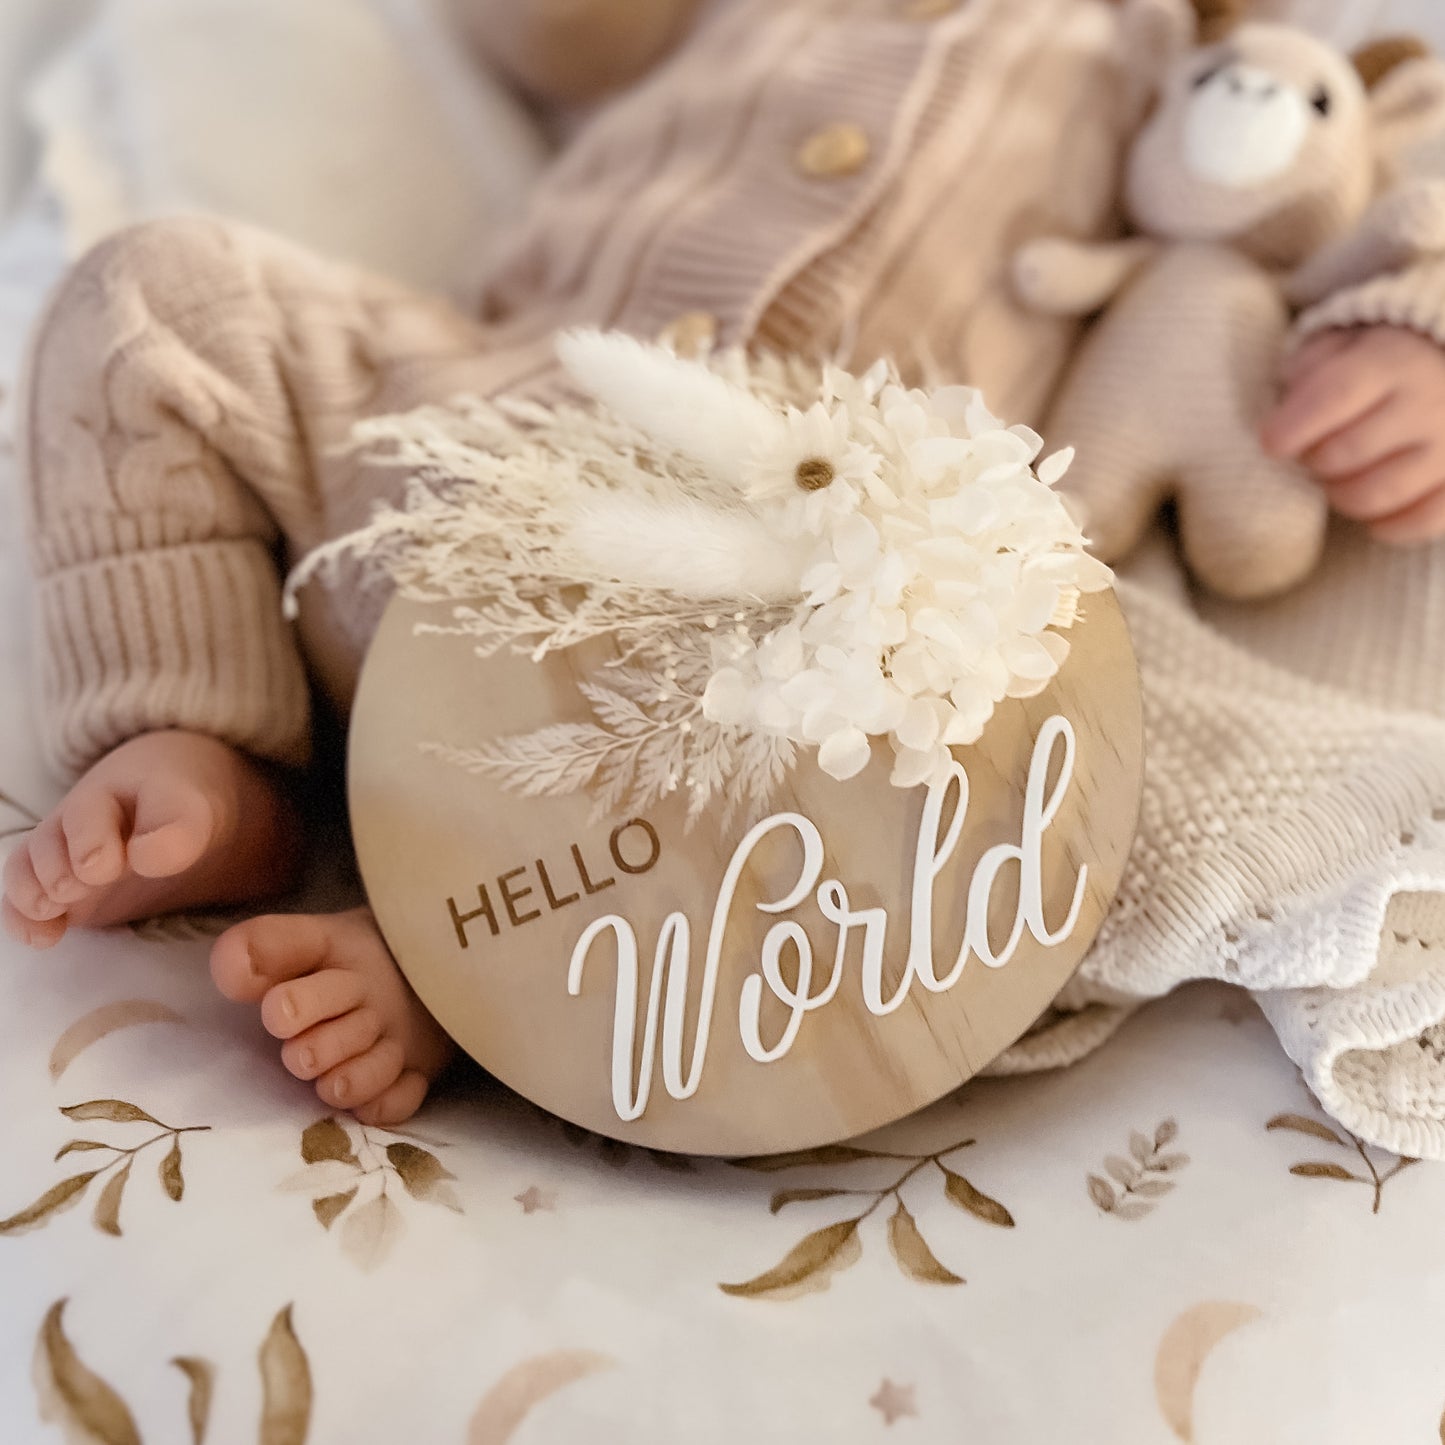 Hello World Announcement Plaque w/ dried flowers